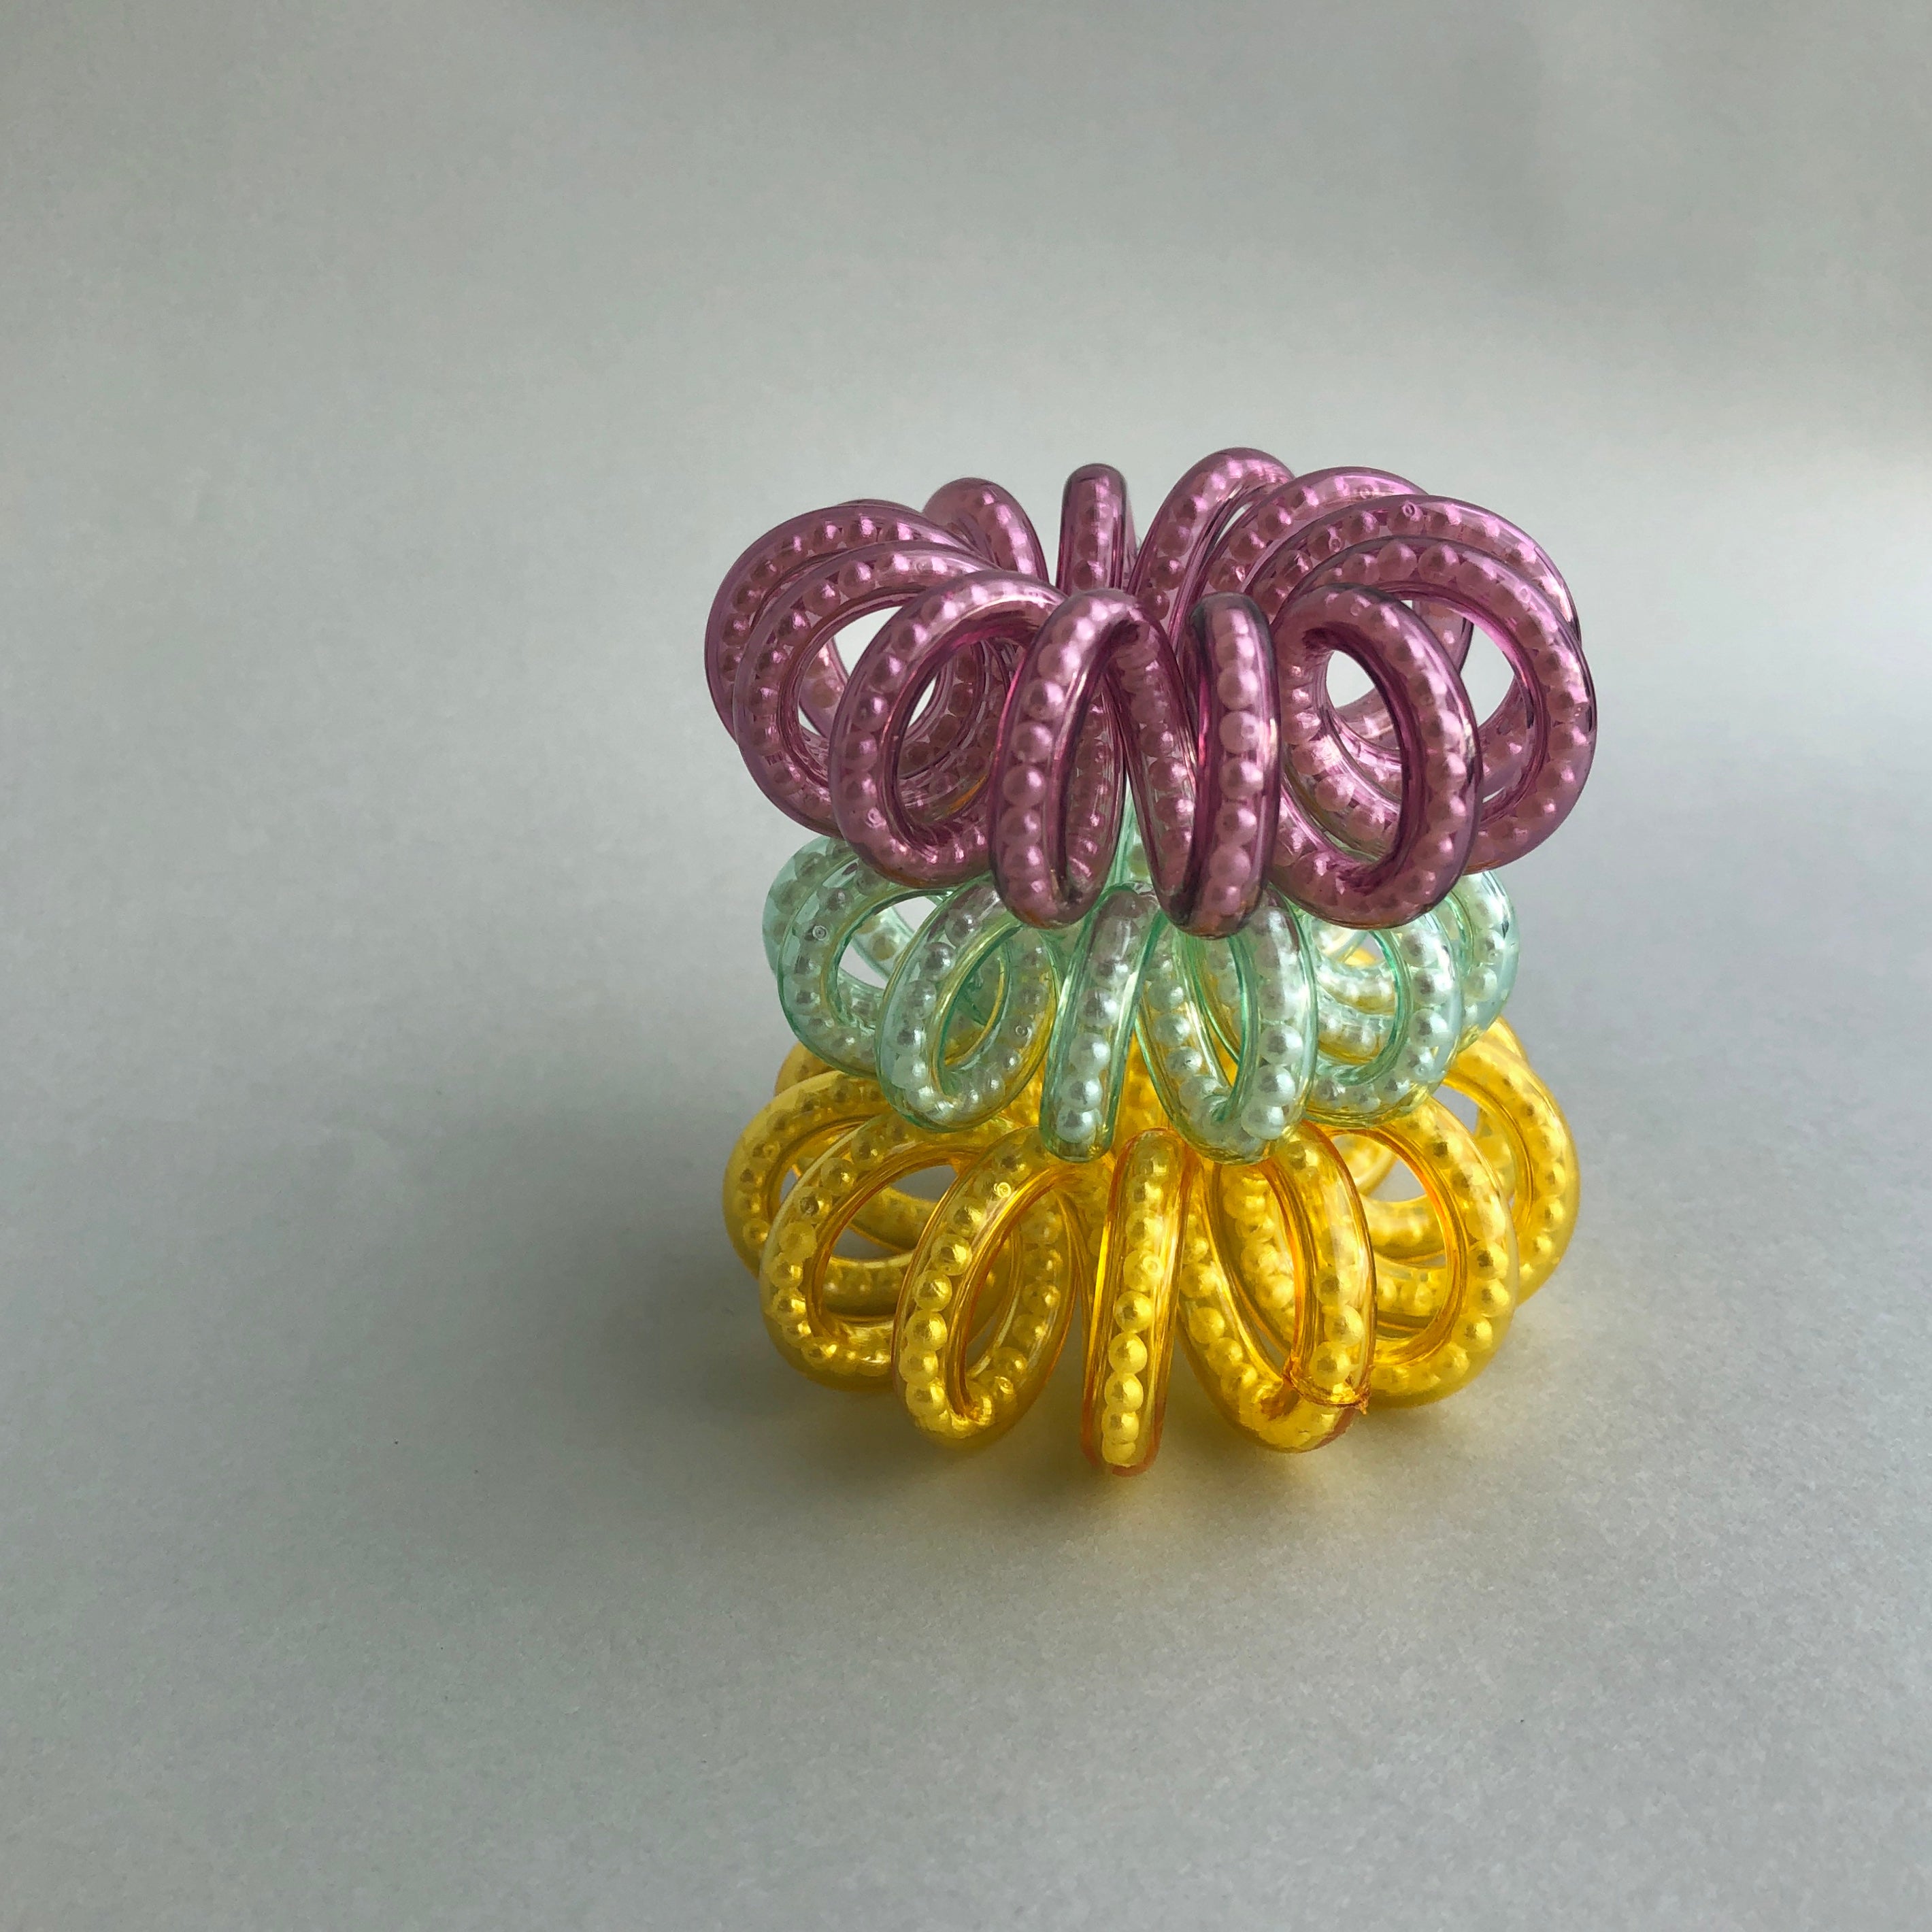 Beaded Phonecord Hairties by Veronique